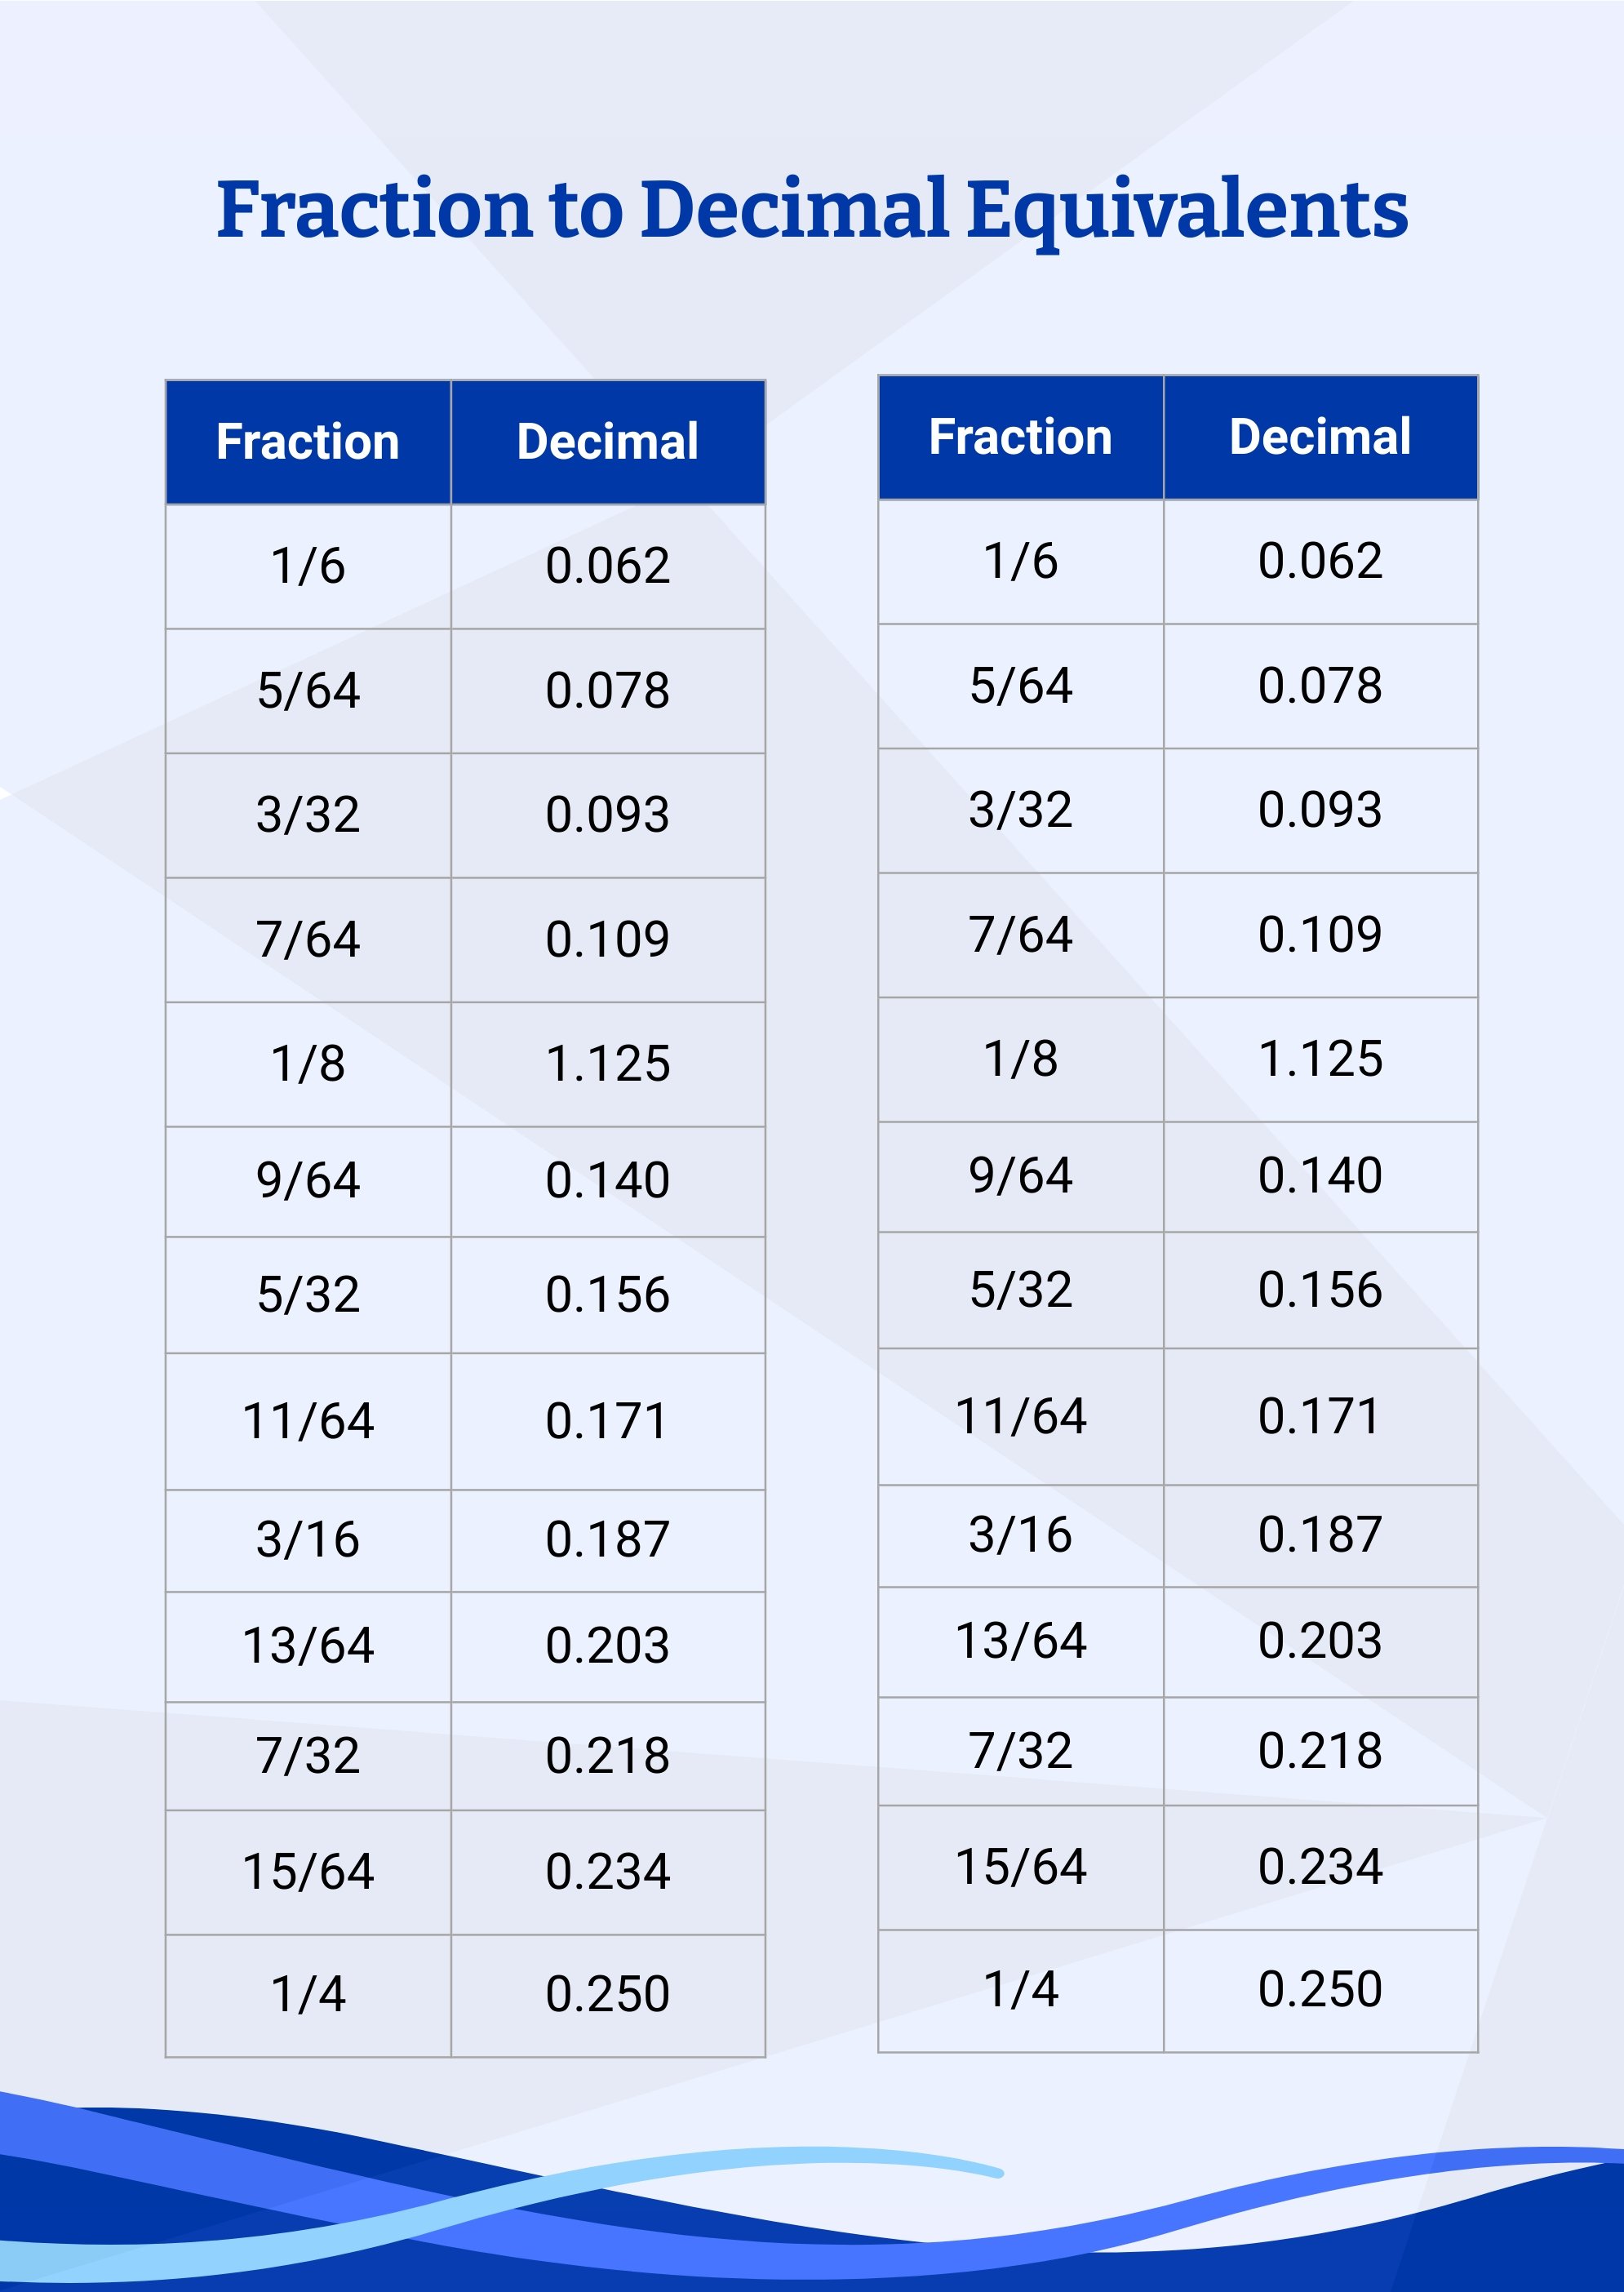 Free Fraction Decimal Percent Conversion Chart - Download in PDF ...